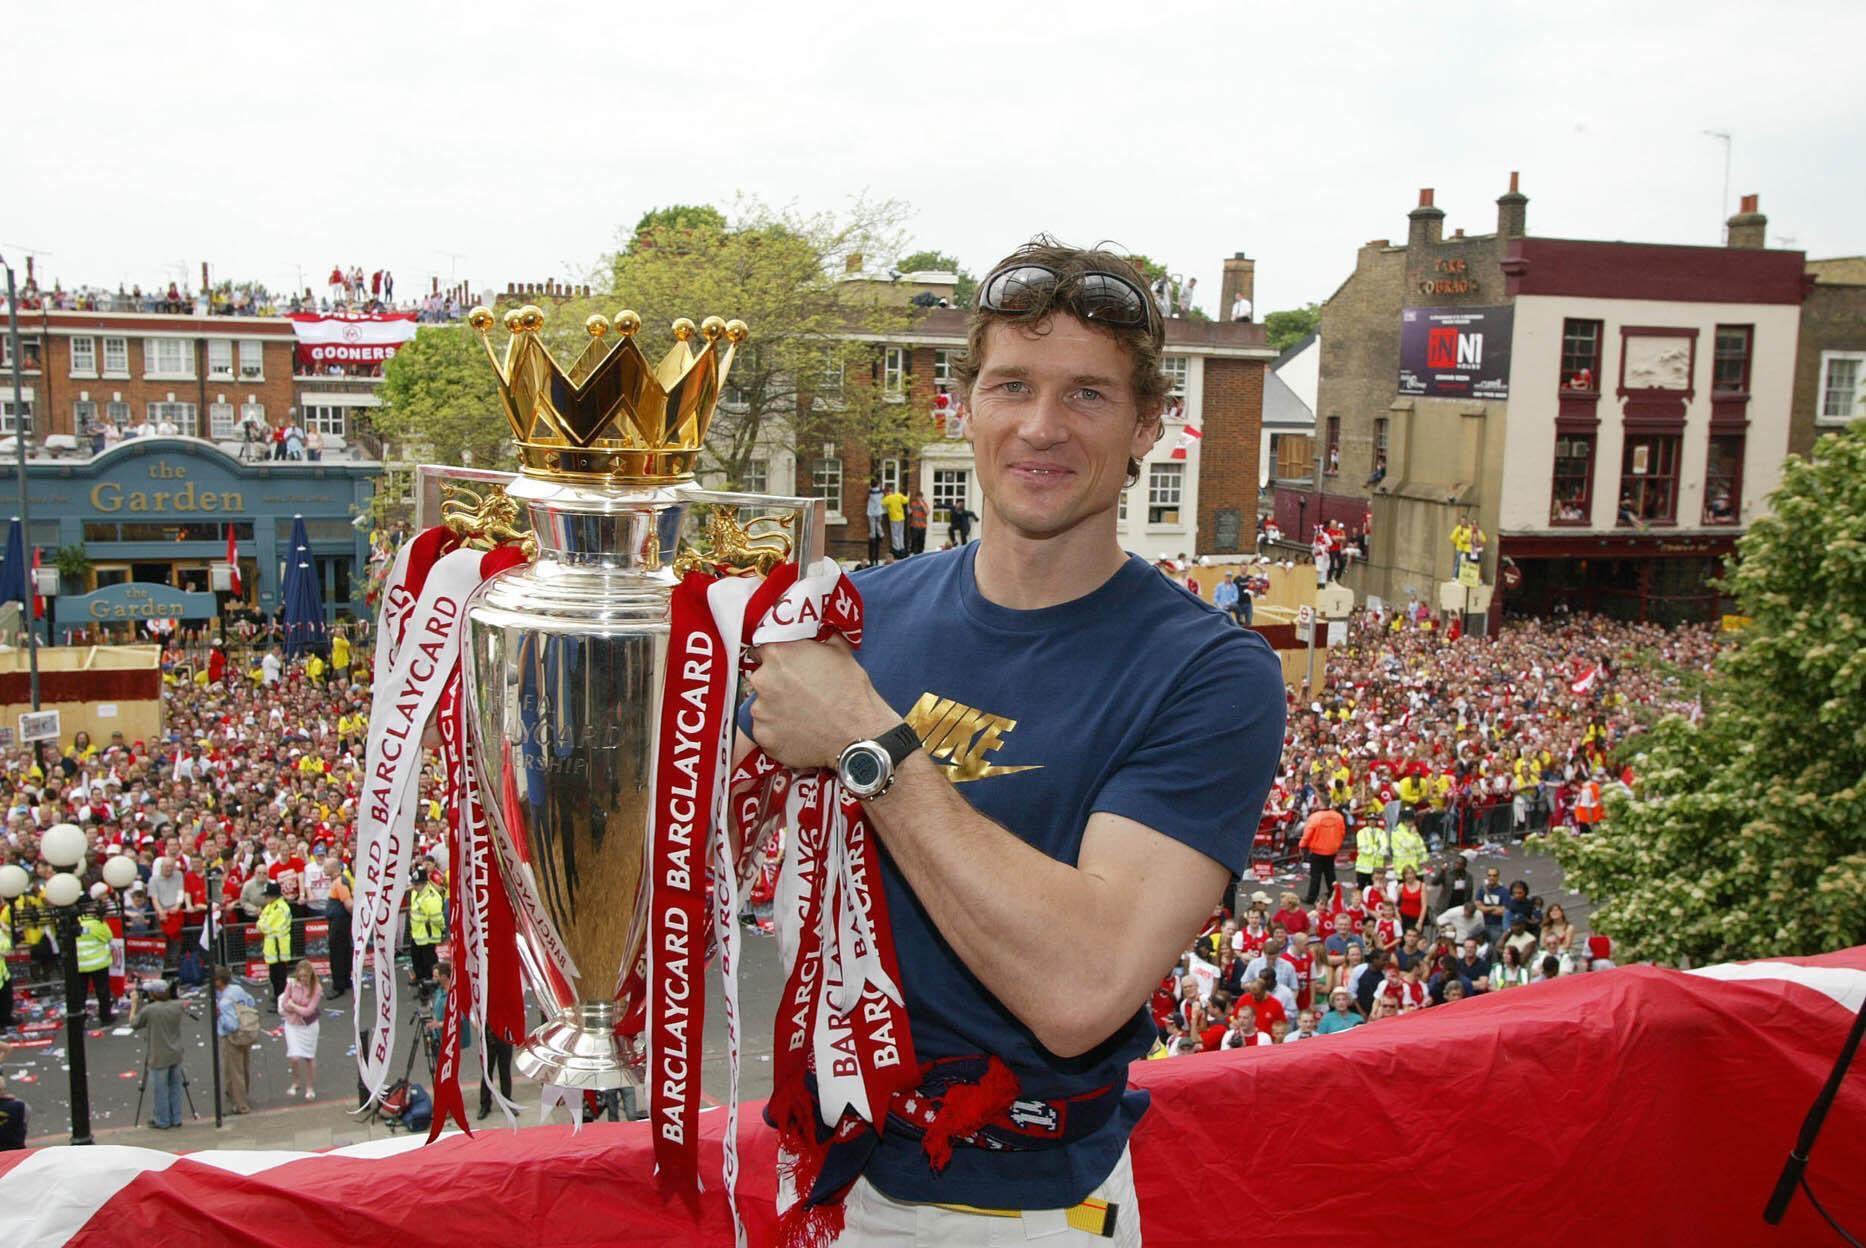 48 years old 147 appearances   77 clean sheets  Happy birthday to our German legend, Jens Lehmann! 